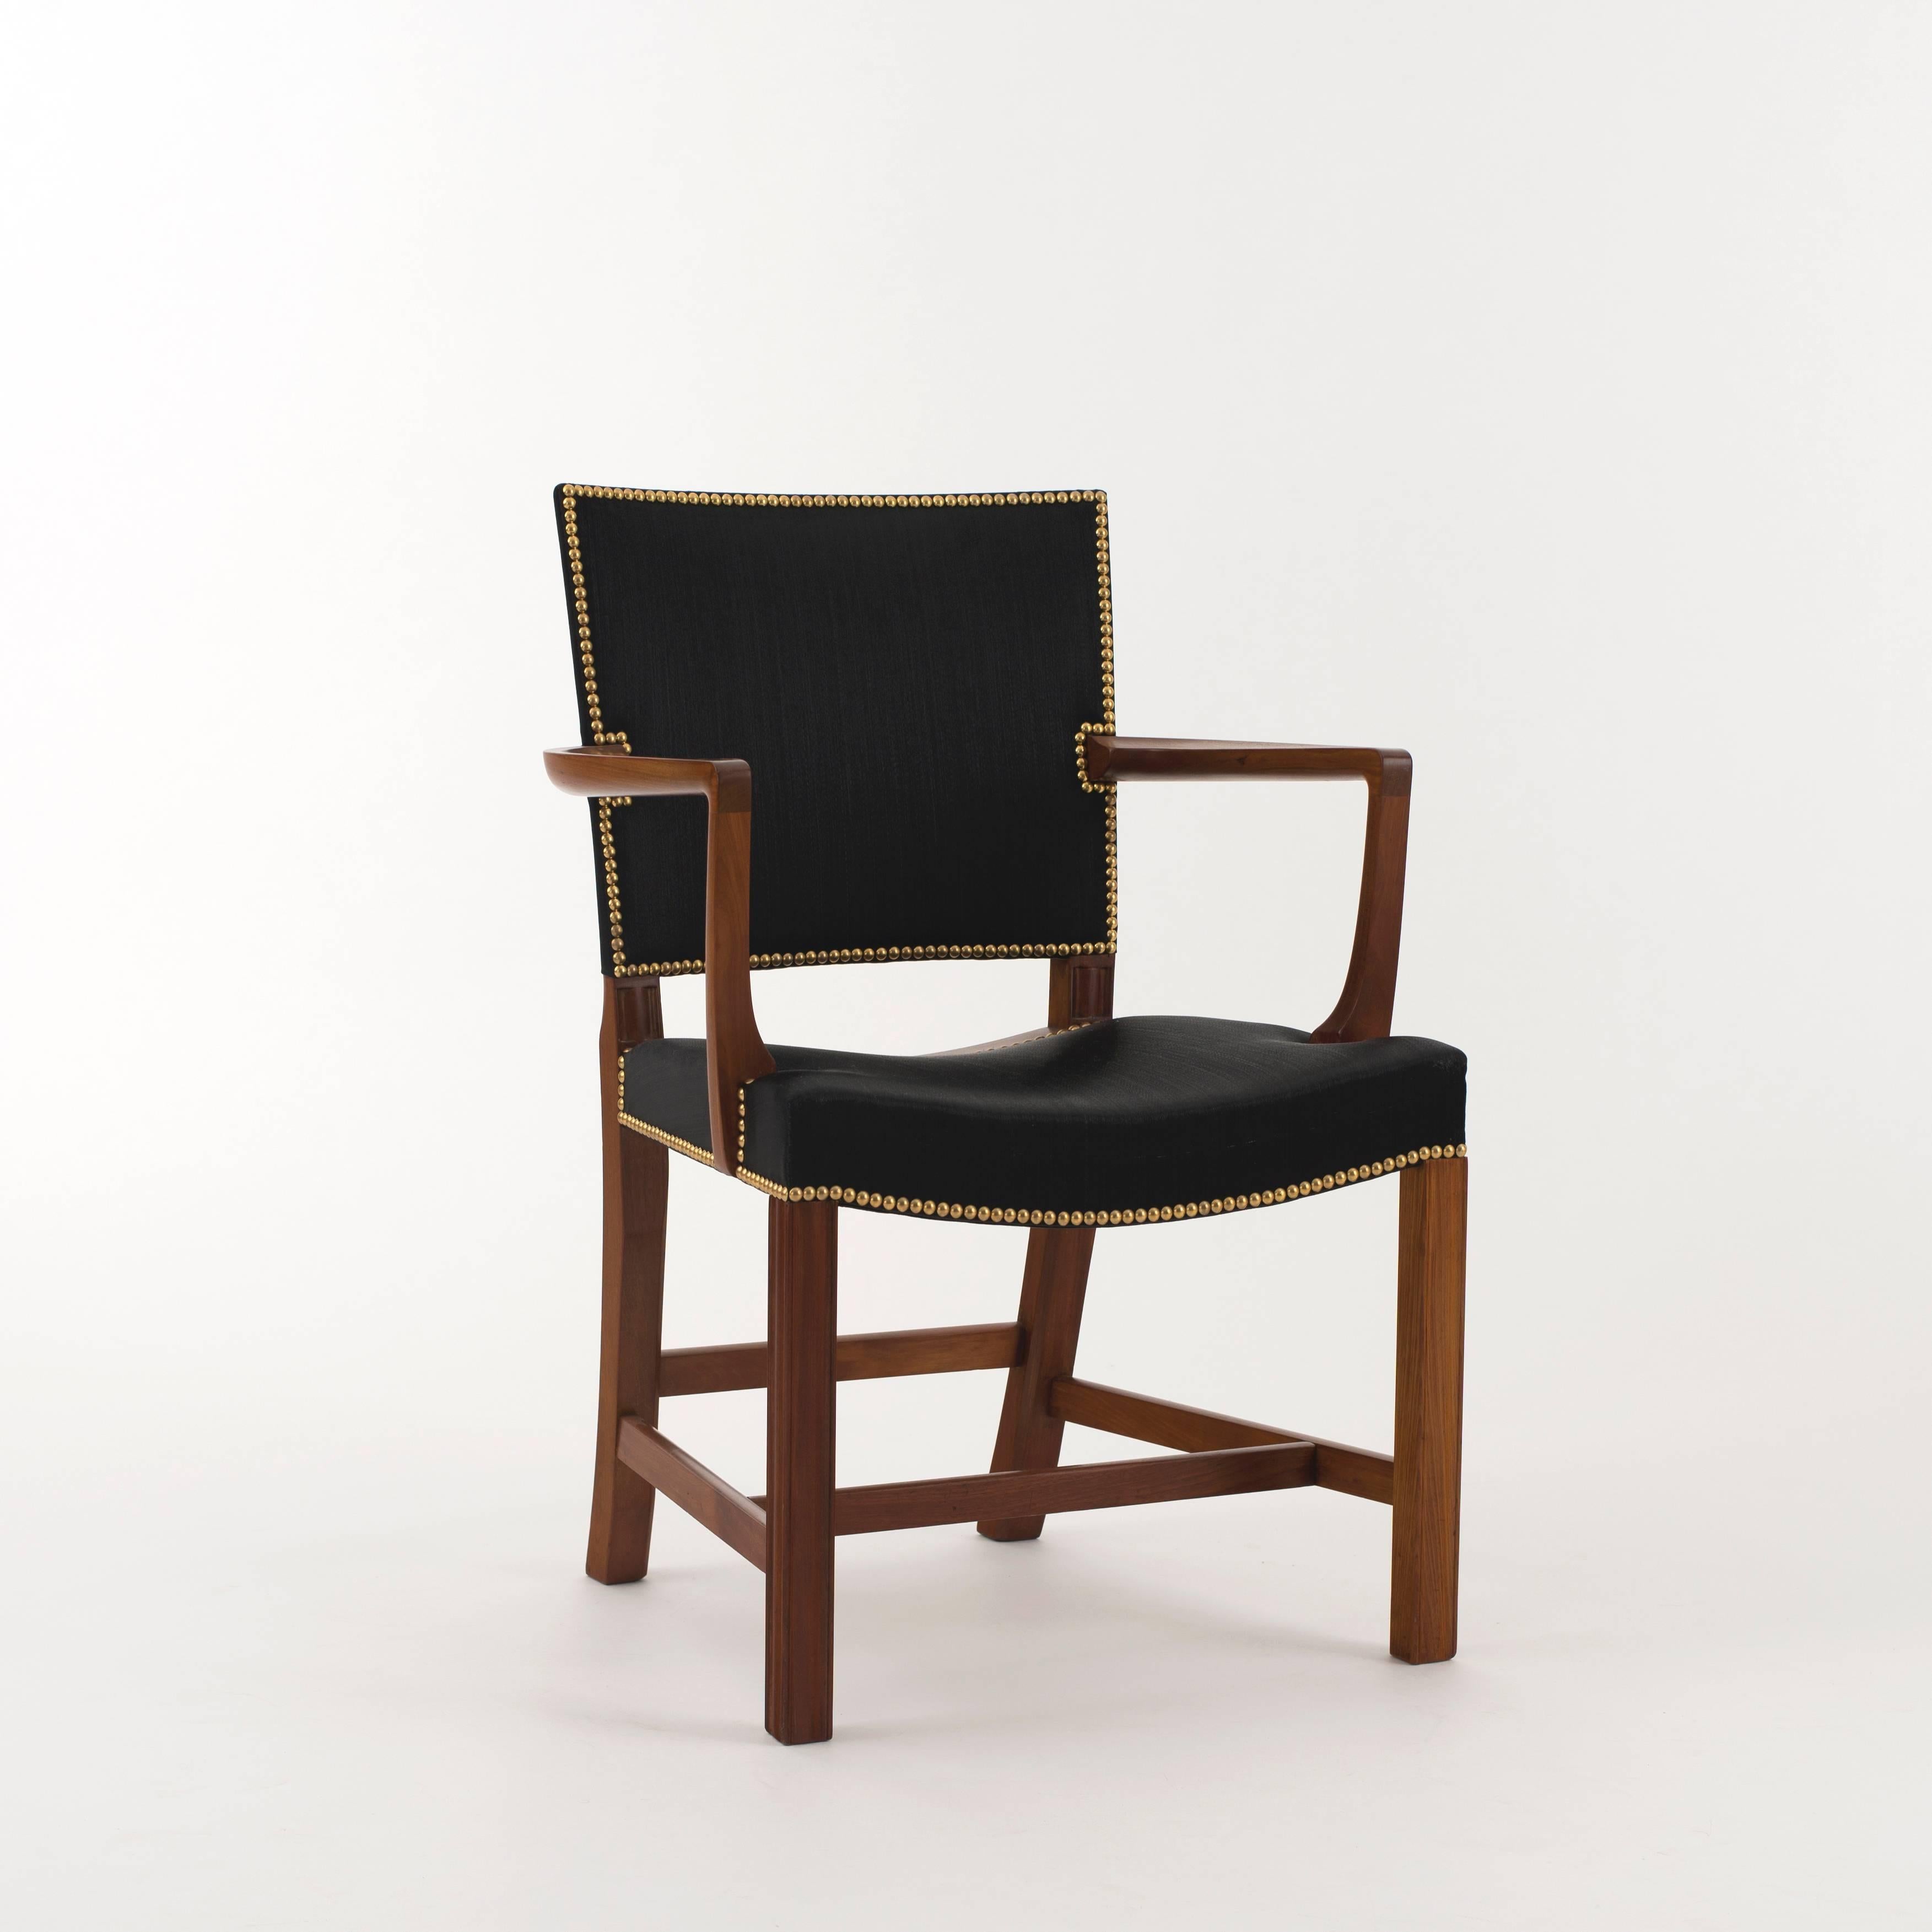 Kaare Klint 'red chair' in Cuban mahogany. Upholstered with black horsehair and brass nails. Executed by Rud. Rasmussen, 1934-1938.

Underside with manufacturer's paper label RUD. RASMUSSENS/SNEDKERIER/45 NØRREBROGAD/KØBENHAVN, pencilled serial